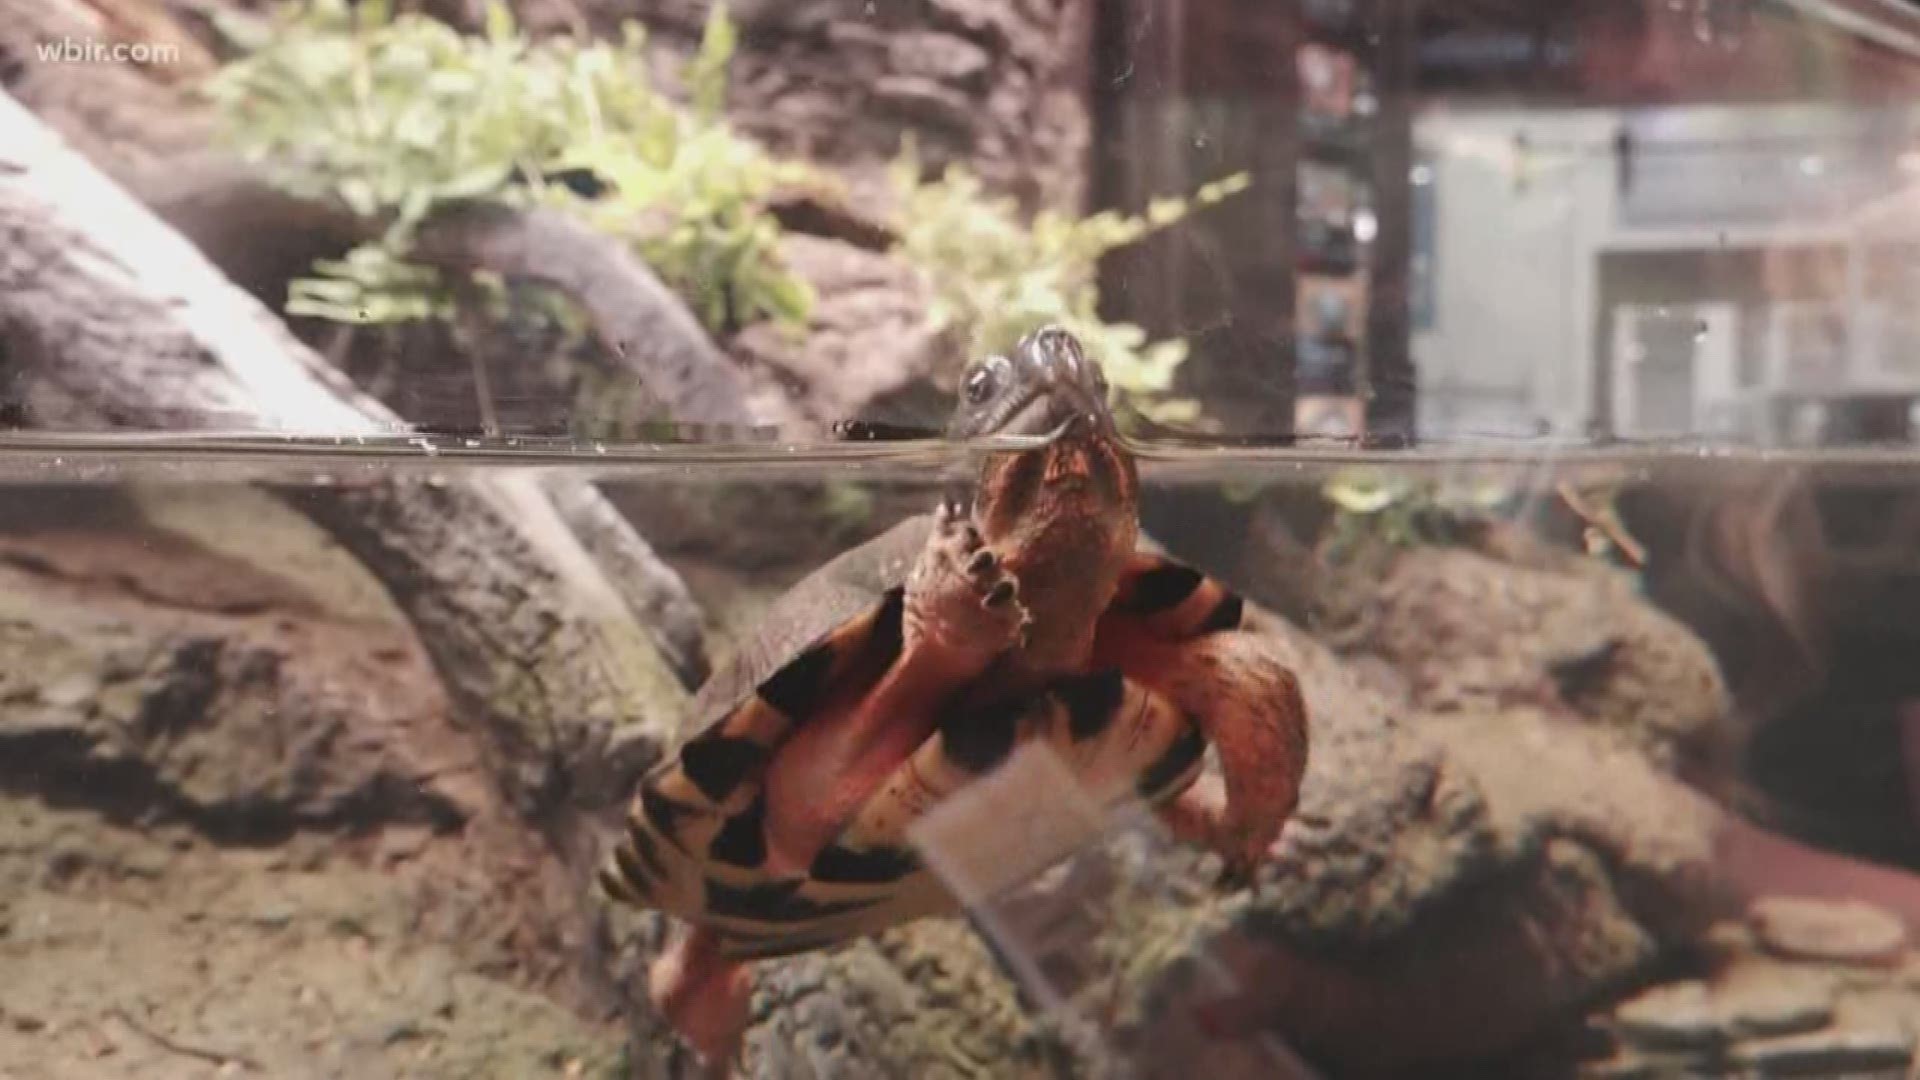 A look at the efforts by the Tennessee Aquarium in Chattanooga to save all species of turtles as well as a new Veterans exhibit. March 19, 2020-4pm.